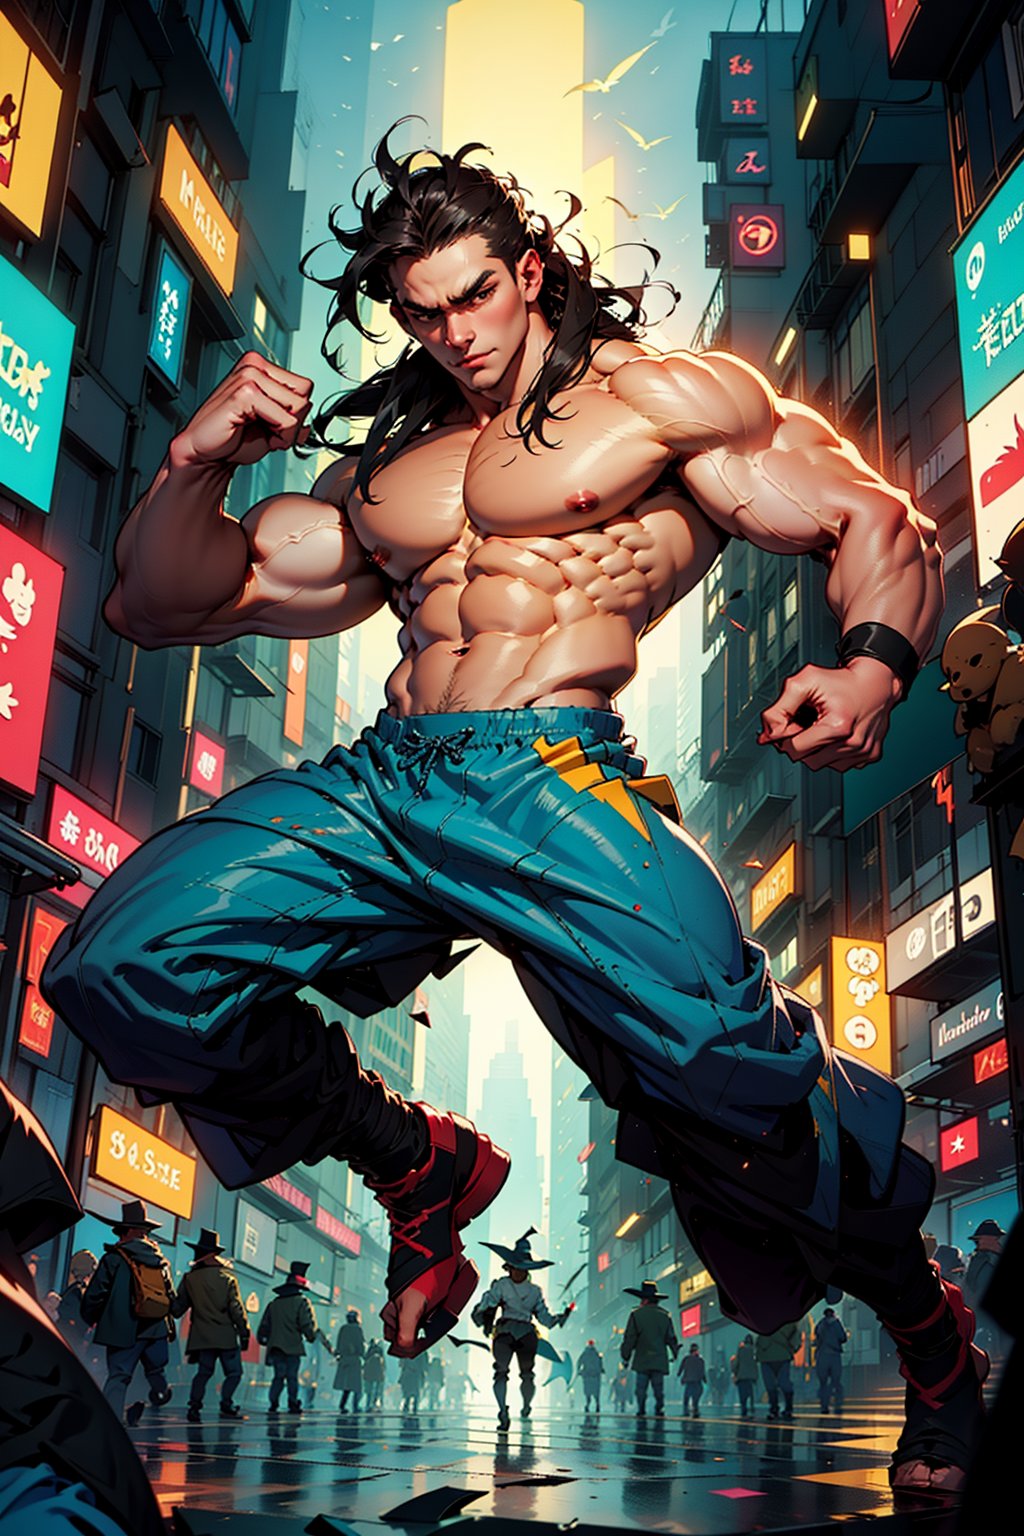 kind-hearted Asian bodybuilder with long, flowing hair, wearing a traditional ninja outfit modified to accommodate his muscles, leaps through a neon-lit cityscape in a dynamic pose, determined to protect a young witch casting a spell.